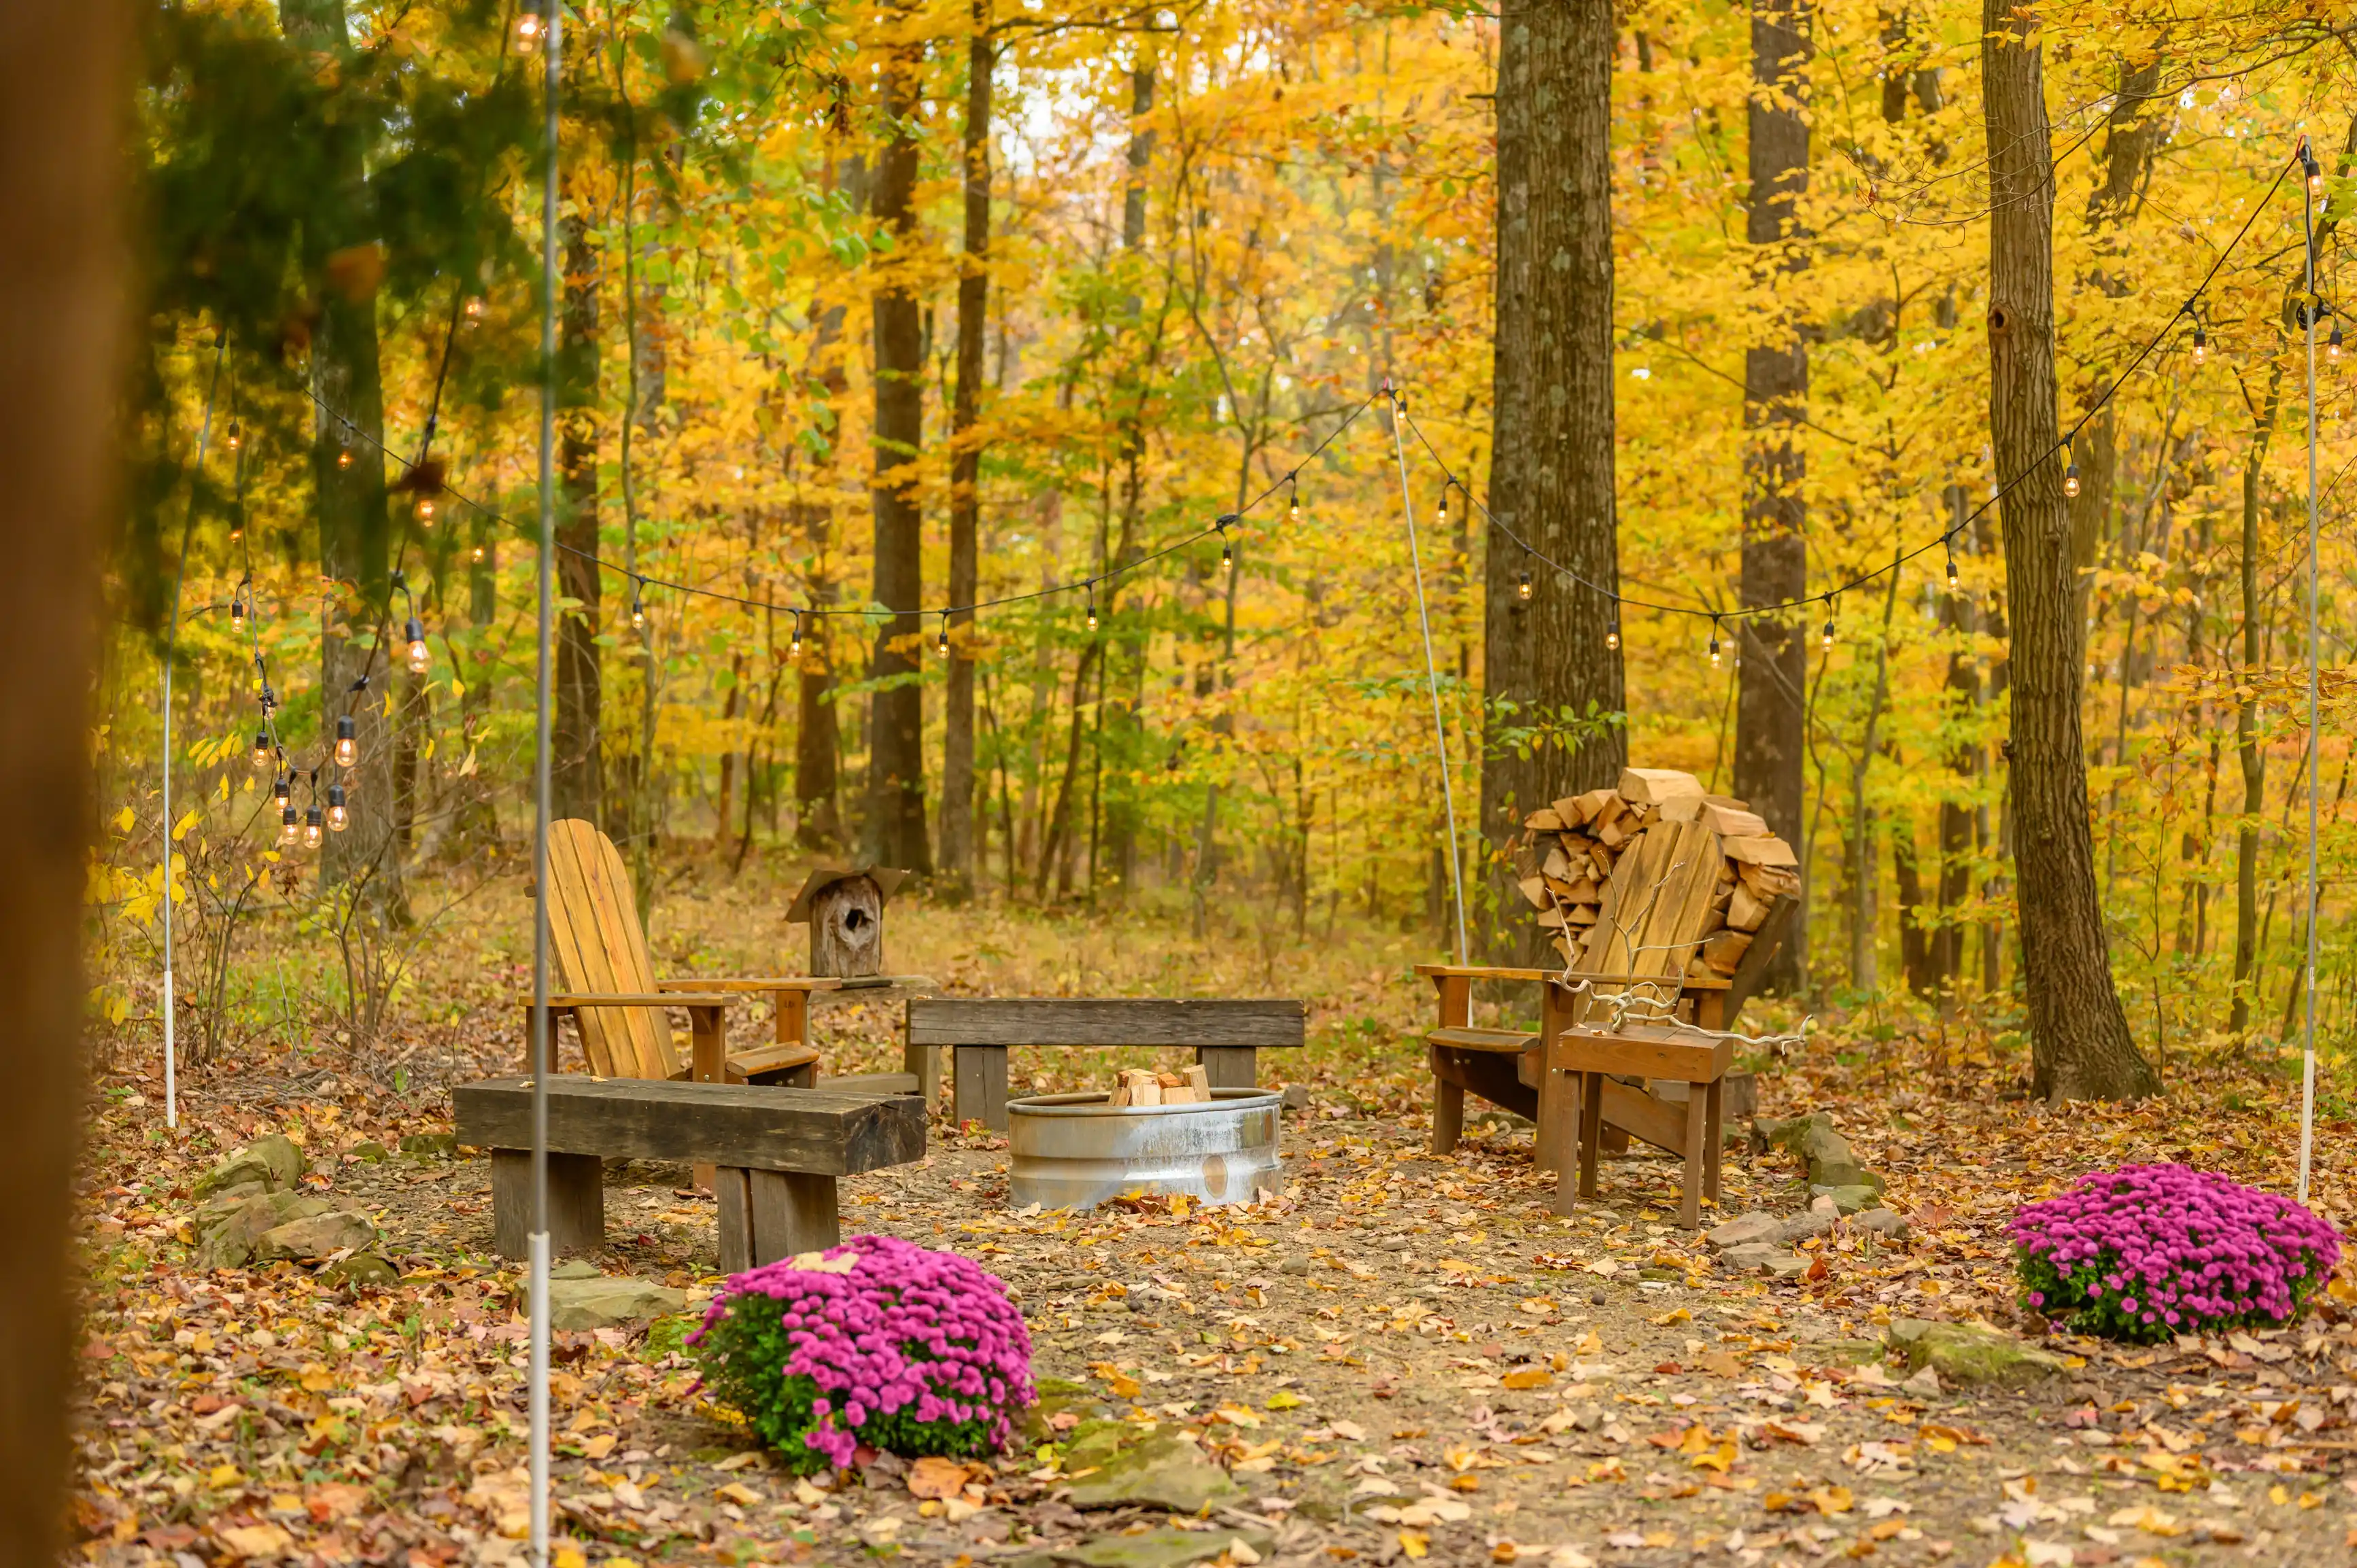 Cozy outdoor autumn scene with wooden chairs around a fire pit, a wood pile, hanging string lights, and vibrant pink mums amidst fallen leaves.